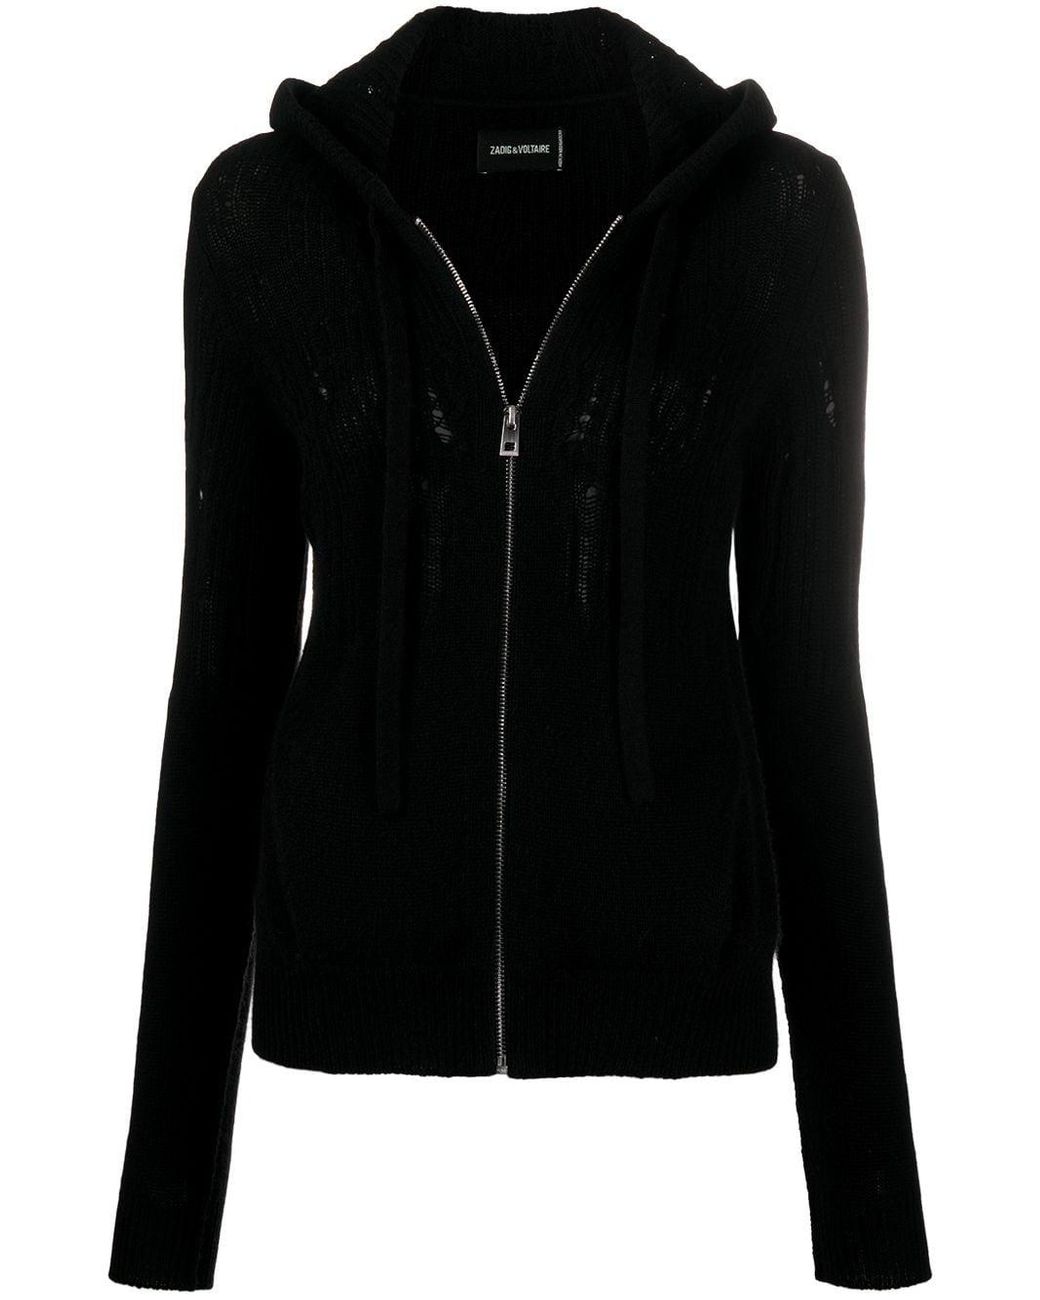 Zadig & Voltaire Cashmere Distressed Zipped Hoodie in Black - Lyst